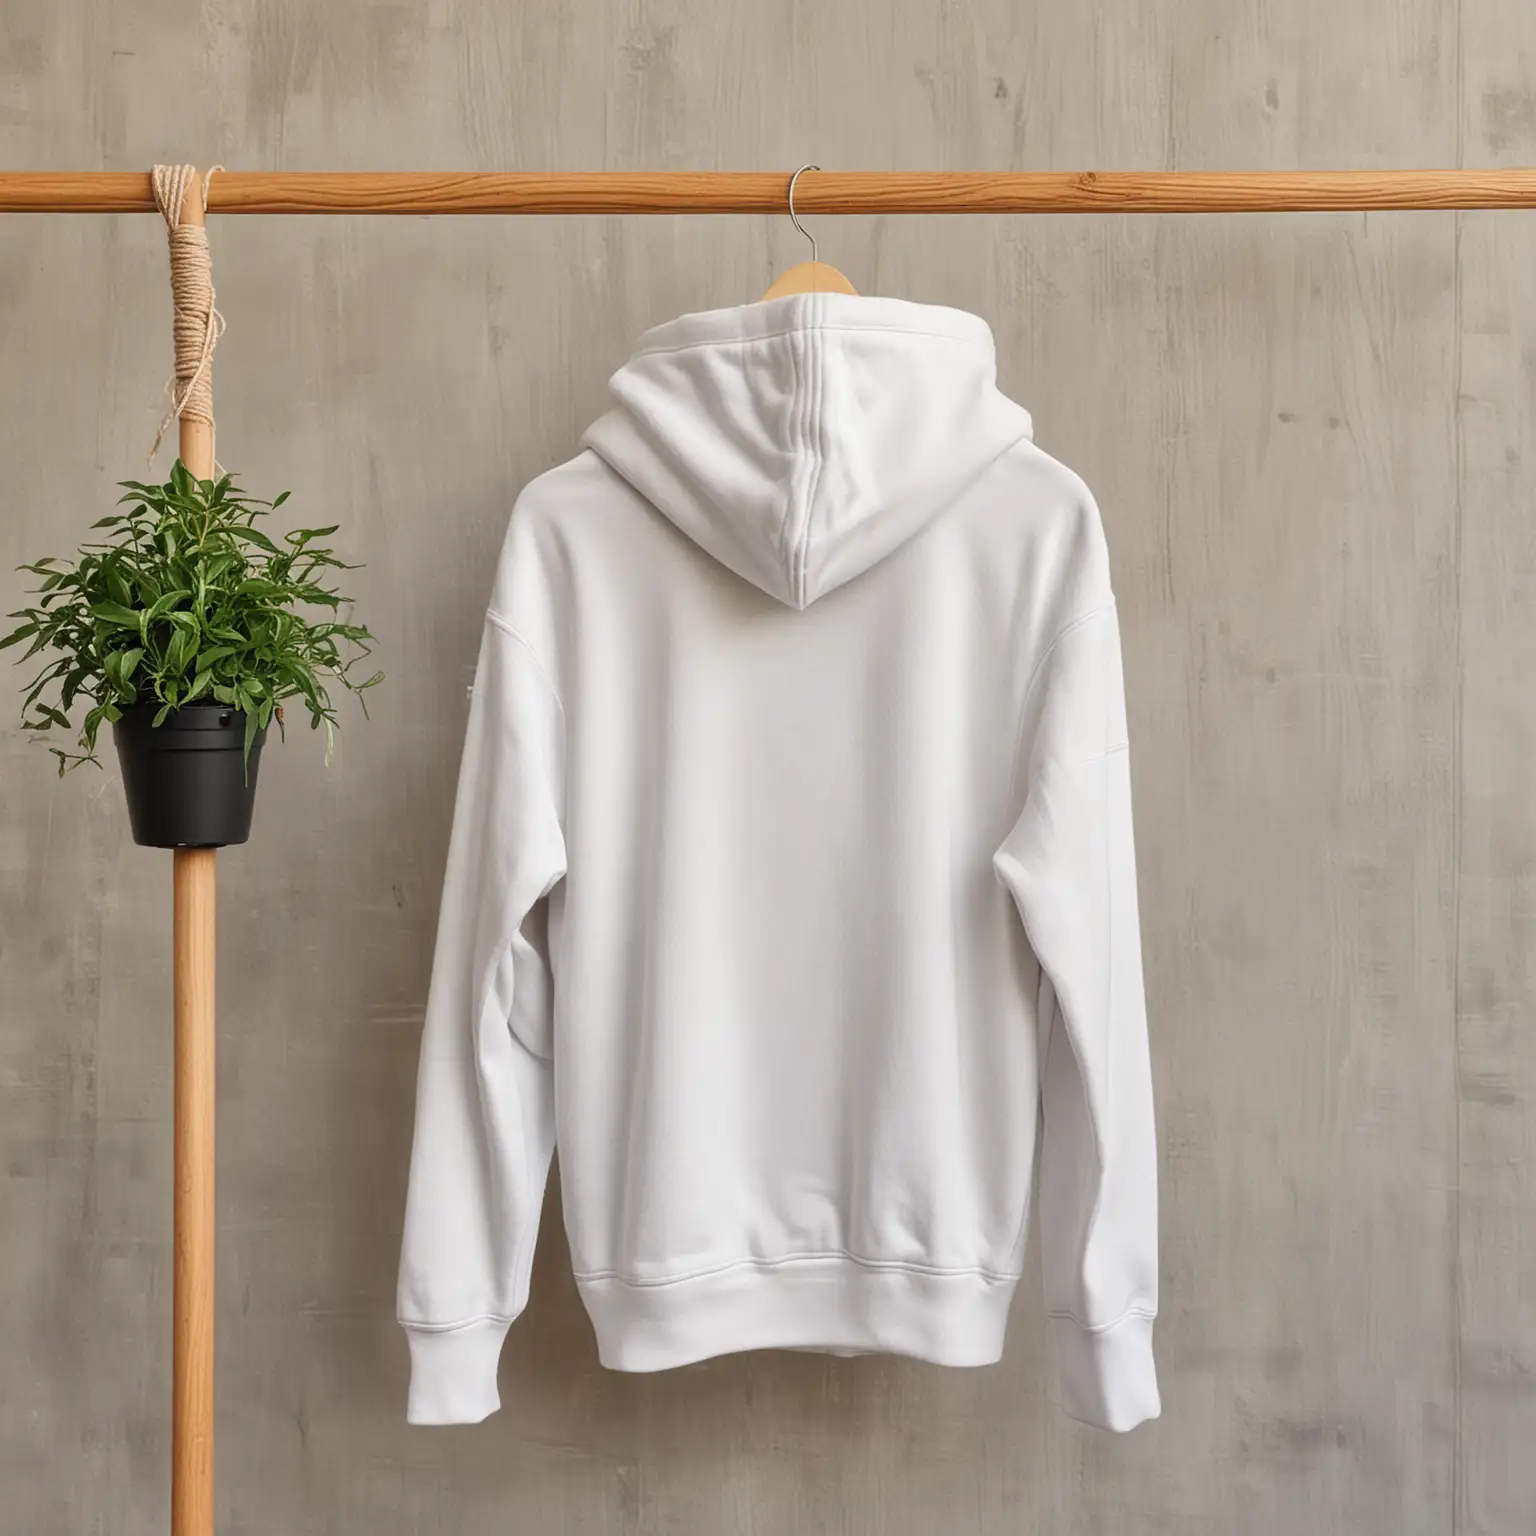 Blank Back Hoodie Hanging on Wooden Pole with Plant